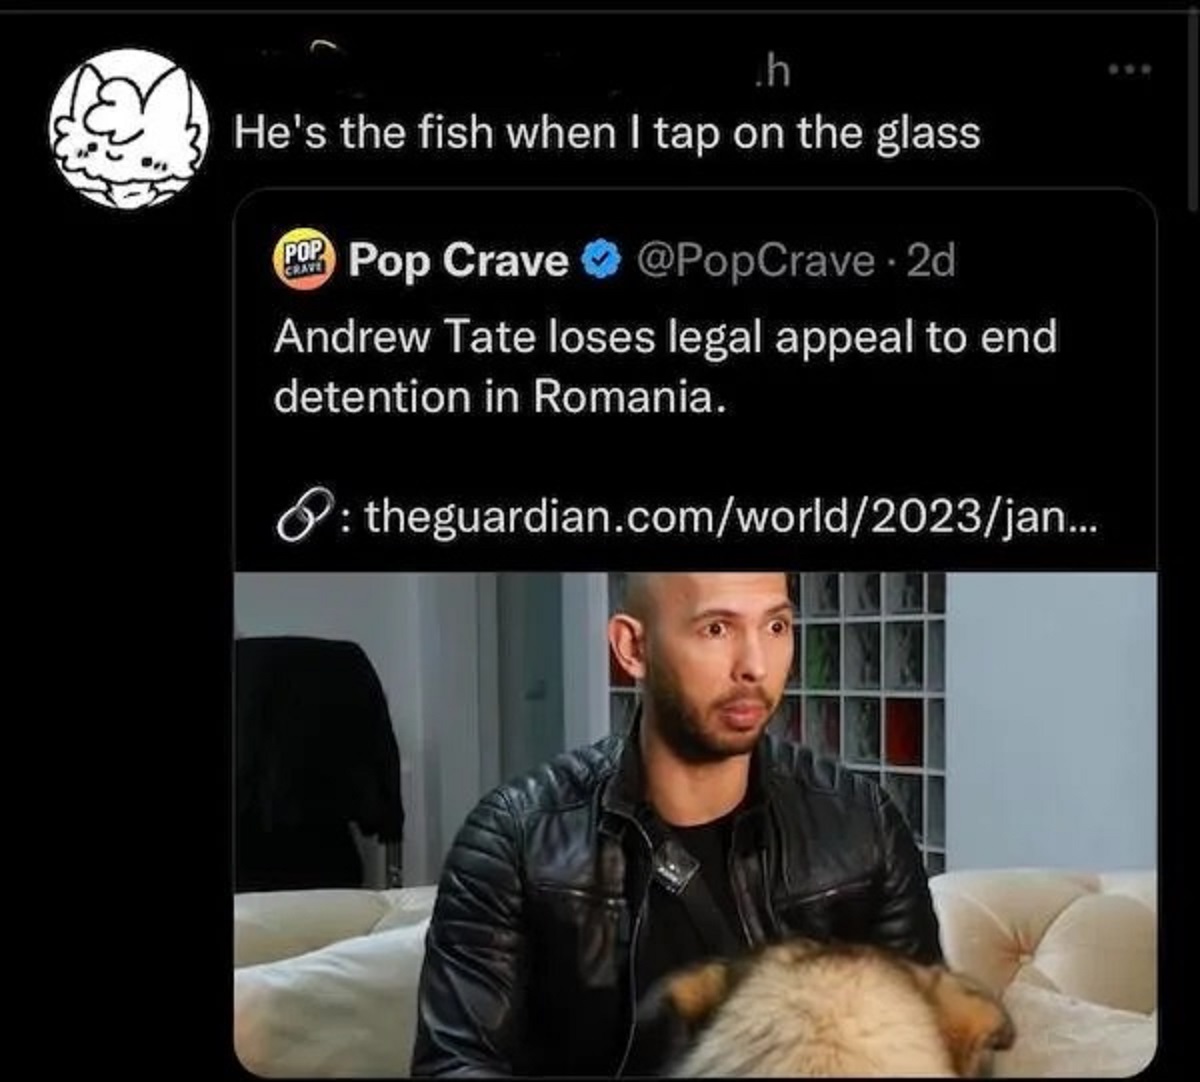 shocked andrew tate - .h He's the fish when I tap on the glass Pop Crave Pop Crave 2d Andrew Tate loses legal appeal to end detention in Romania. theguardian.comworld2023jan...